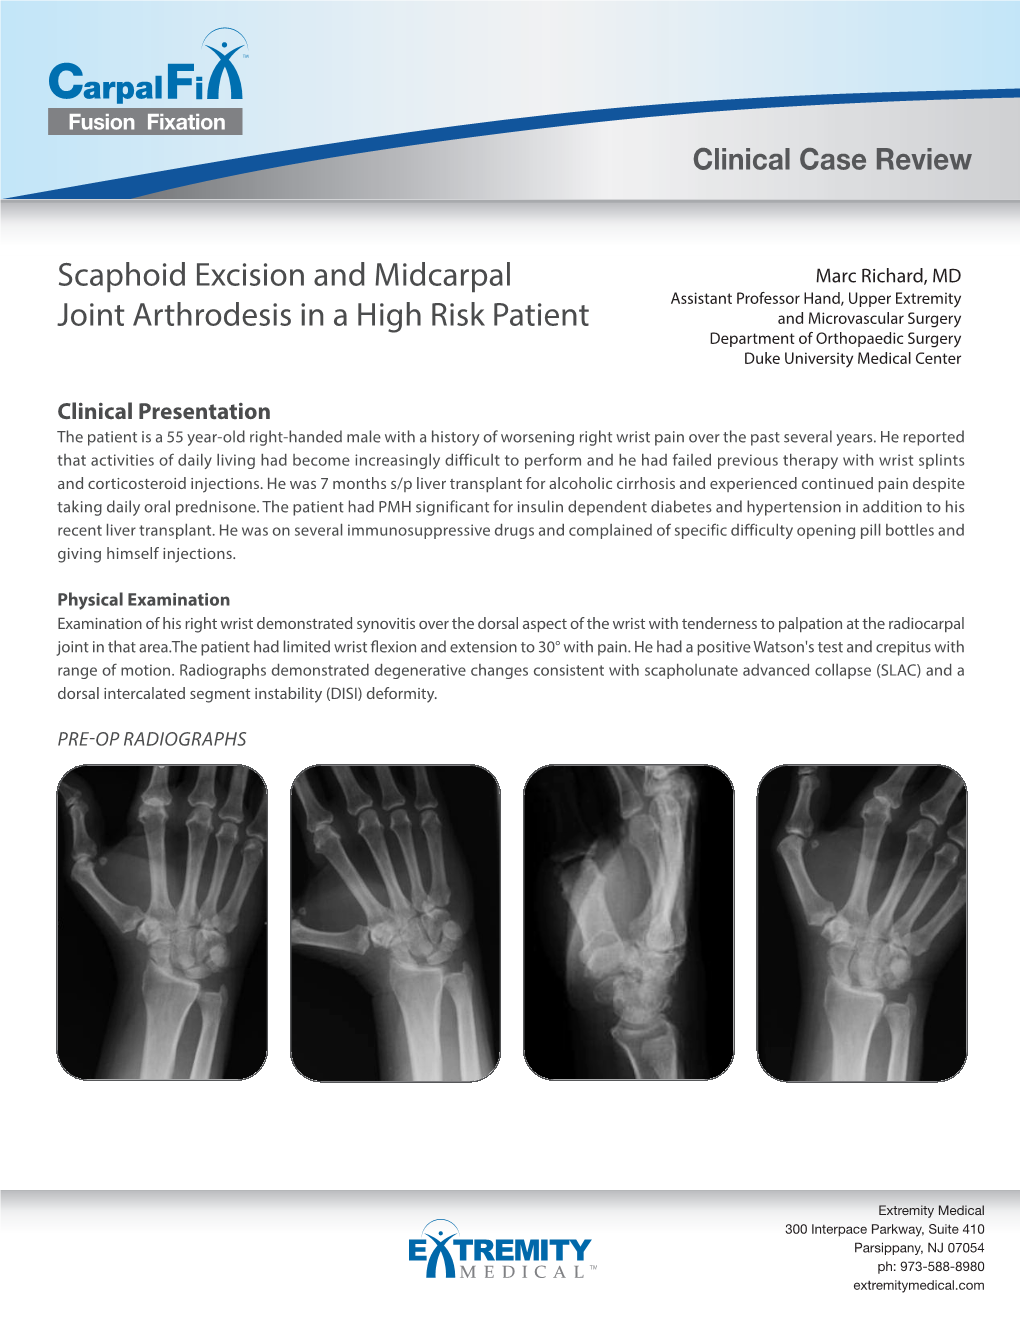 Scaphoid Excision and Midcarpal Joint Arthrodesis in a High Risk Patient